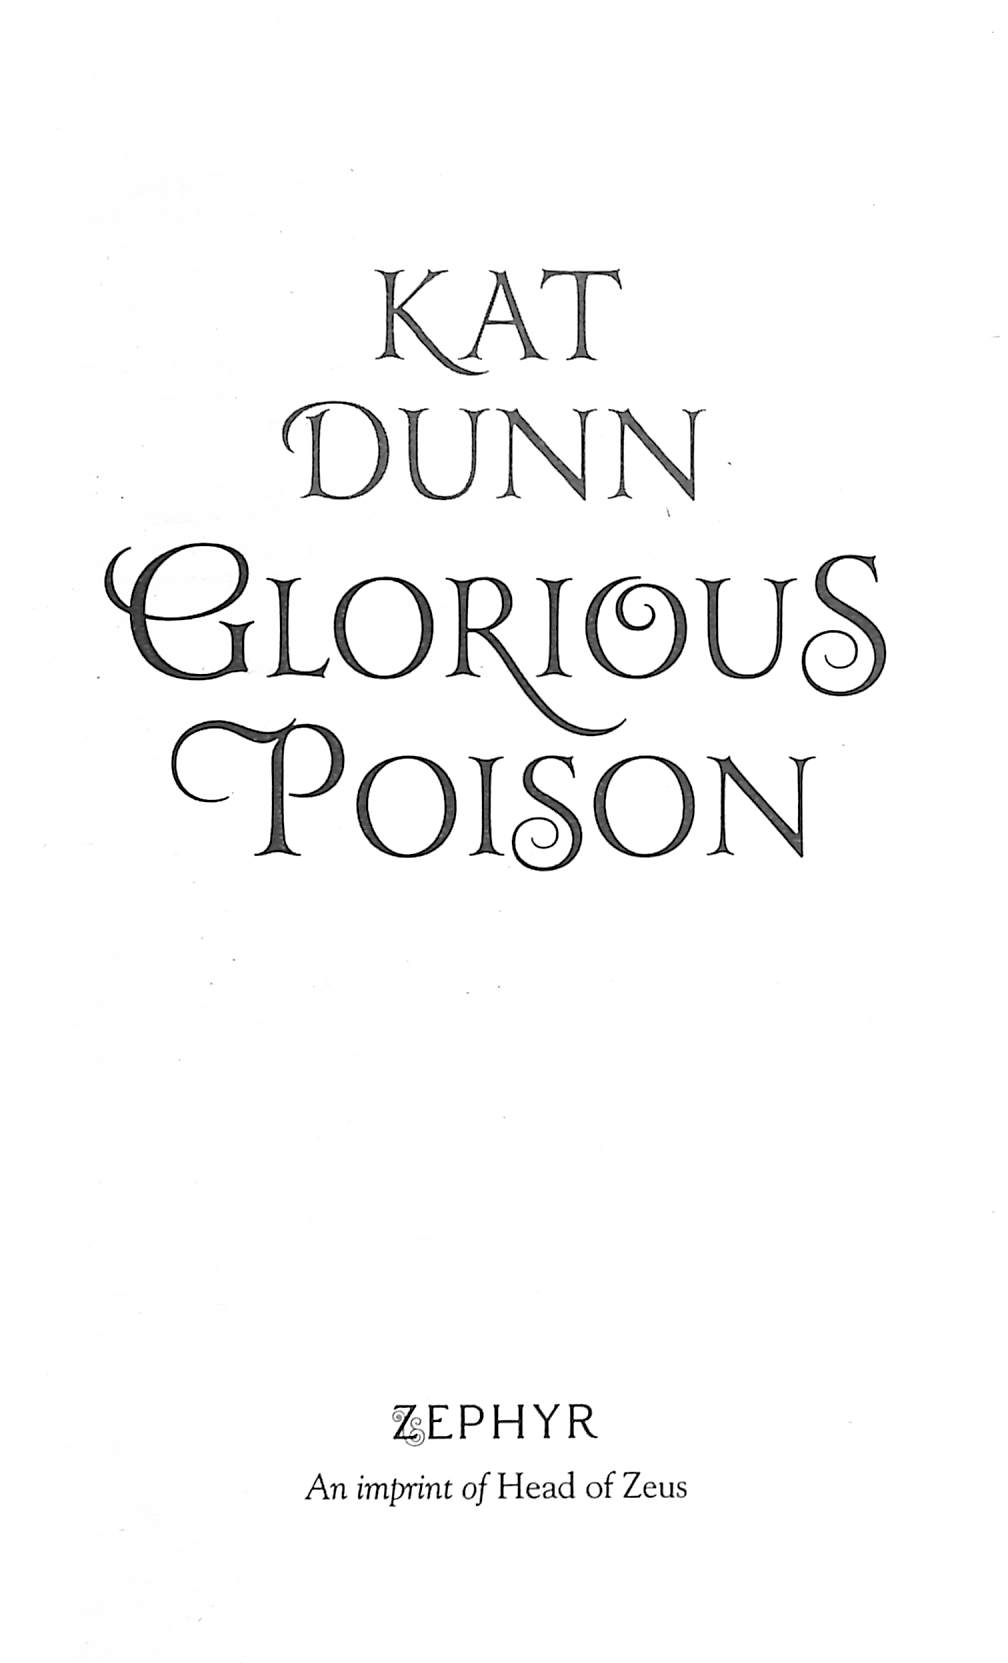 Glorious poison by Kat Dunn